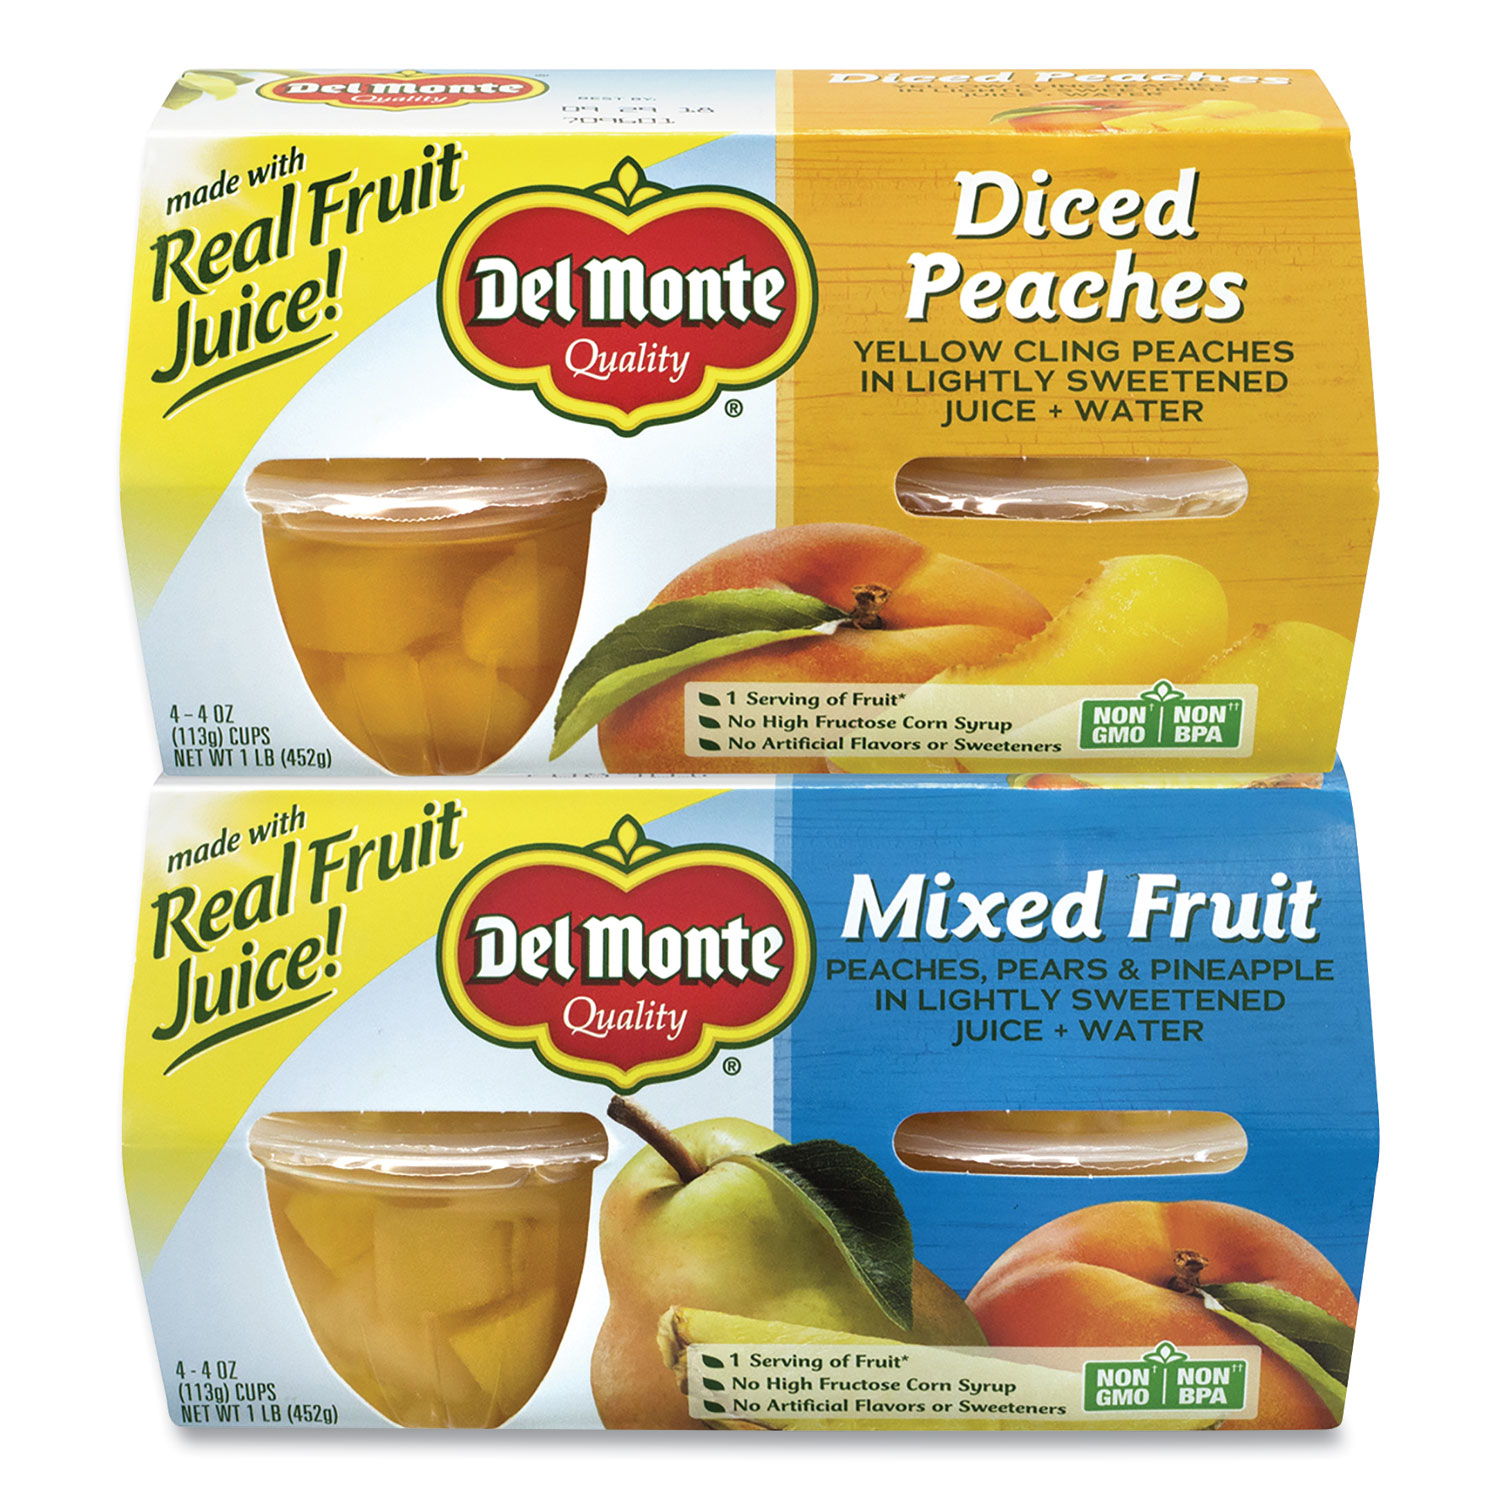  Del Monte 3755 Diced Peaches and Mixed Fruit Cups, 4 oz Cups, 16 Cups/Box, Free Delivery in 1-4 Business Days (GRR22000744) 